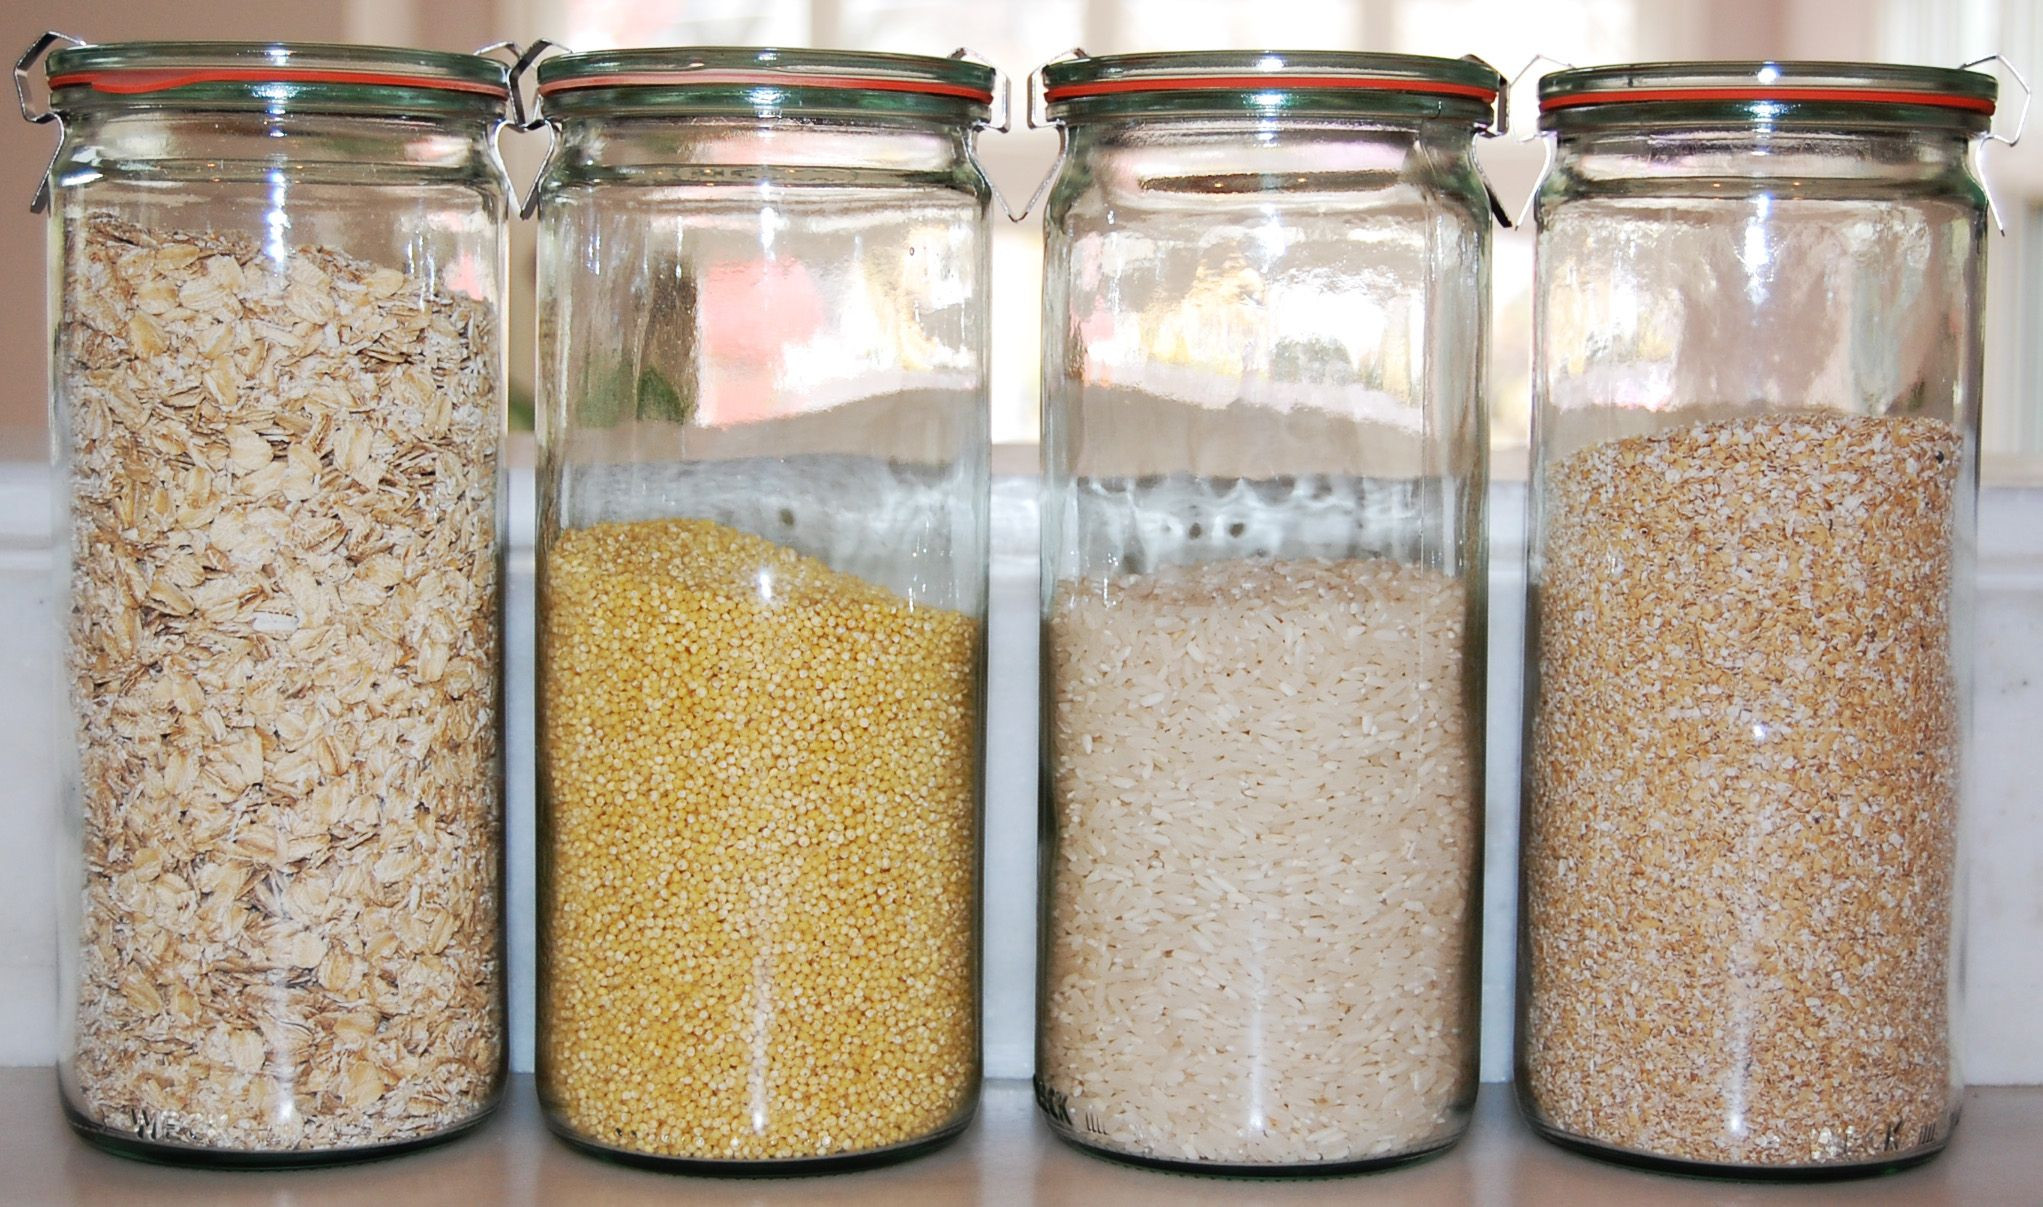 Kitchen Storage Containers Glass
 glass food storage in Weck jars I like using the 1 liter